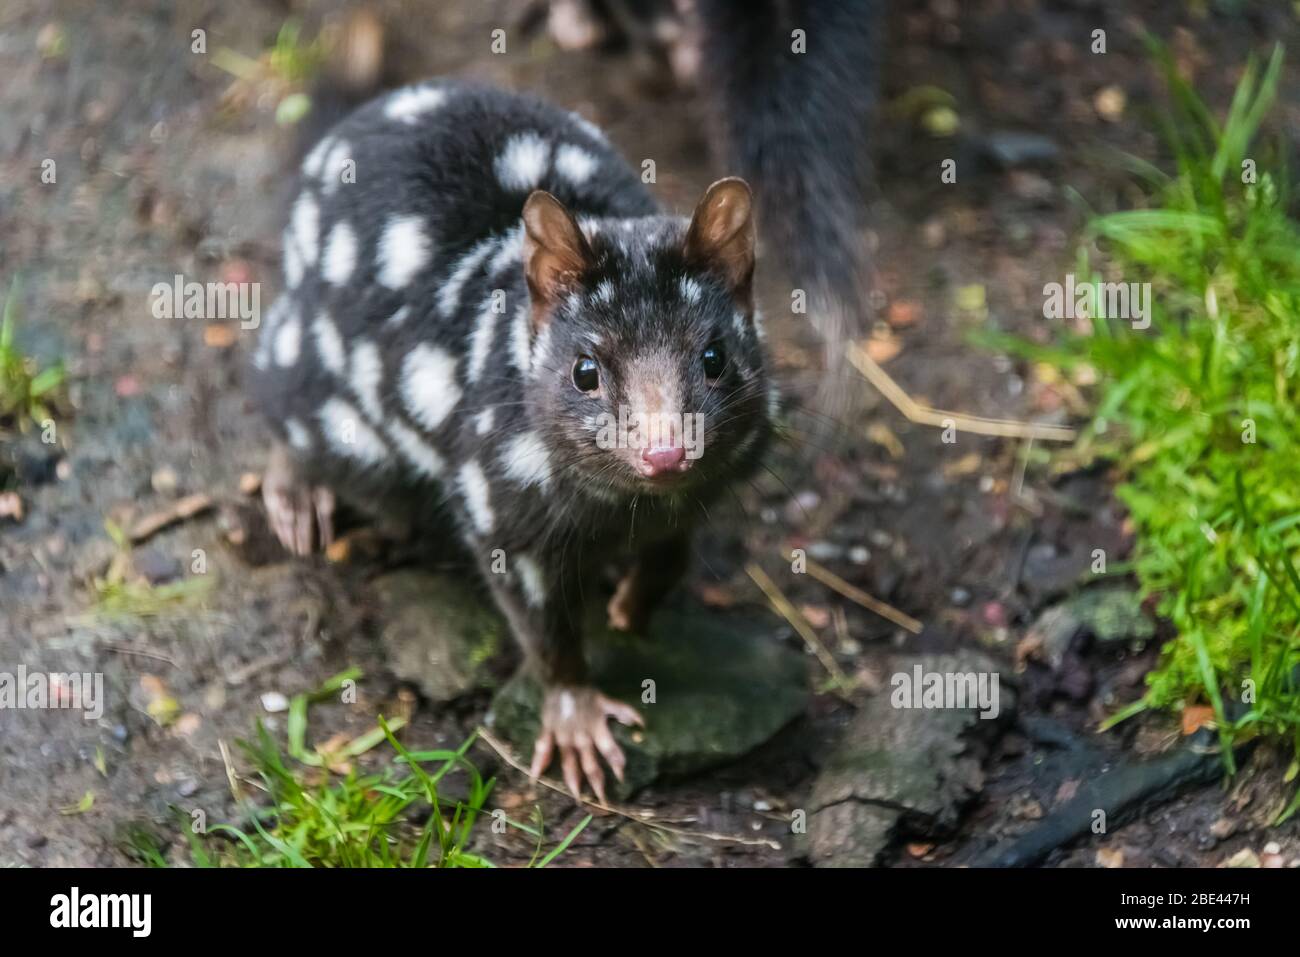 Endangered spotted eastern quoll in a conservancy program at the Tasmanian Devil Sanctuary at Cradle Mountain, Tasmania, Australia Stock Photo